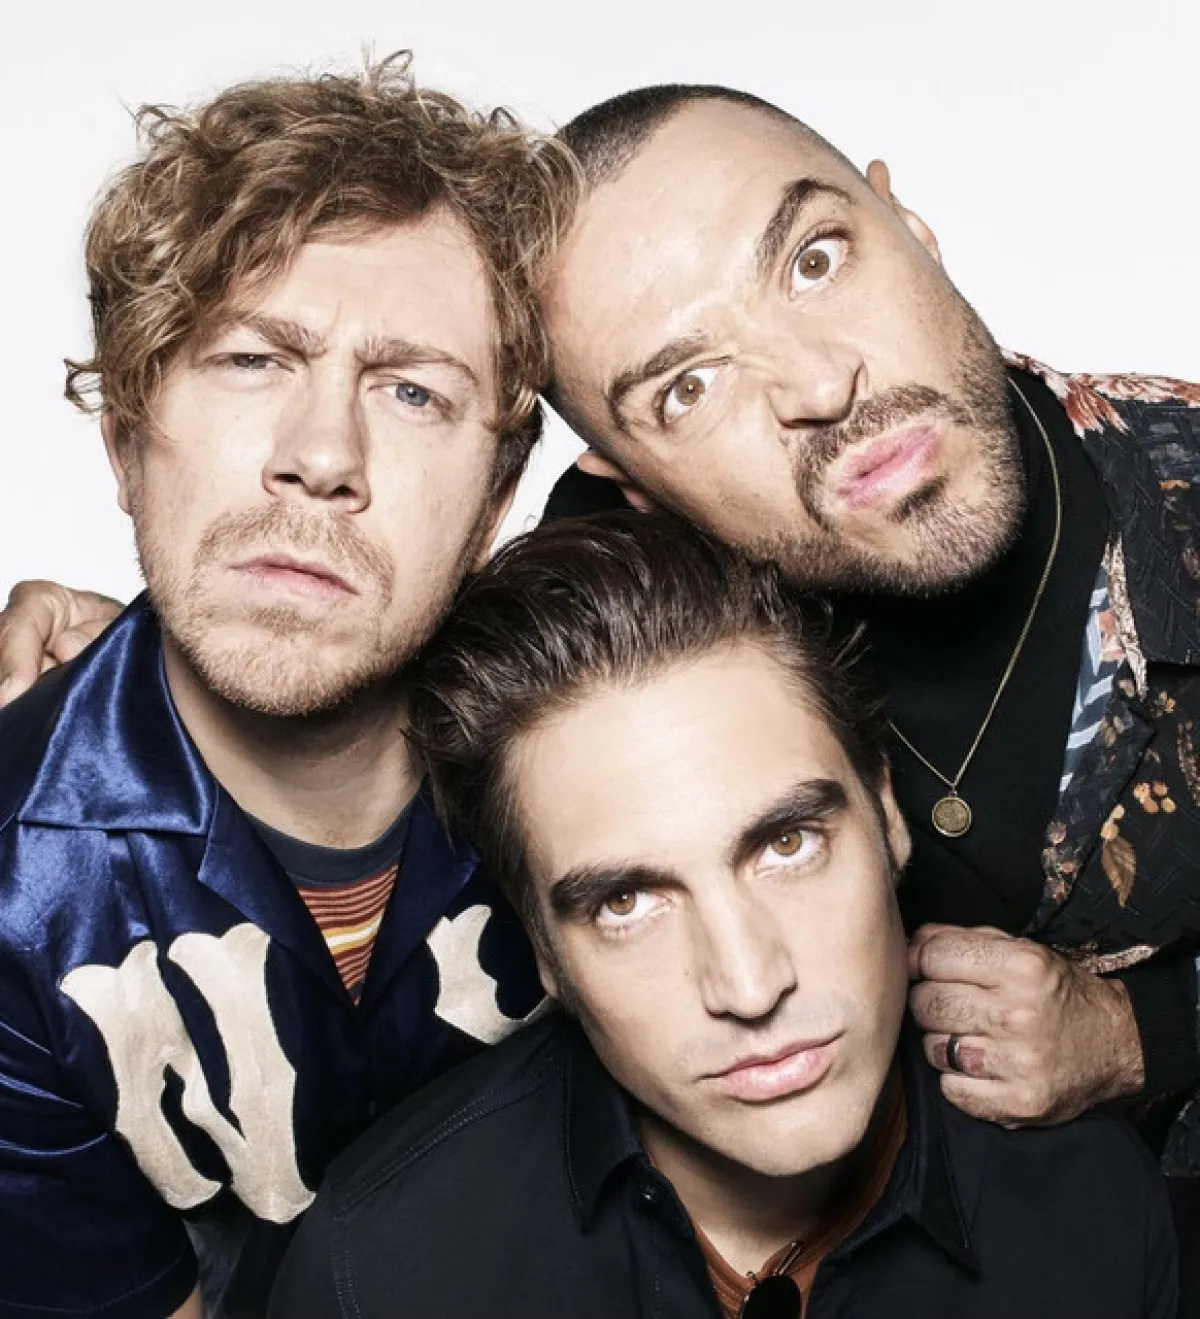 Busted at Dreamland Margate Tickets